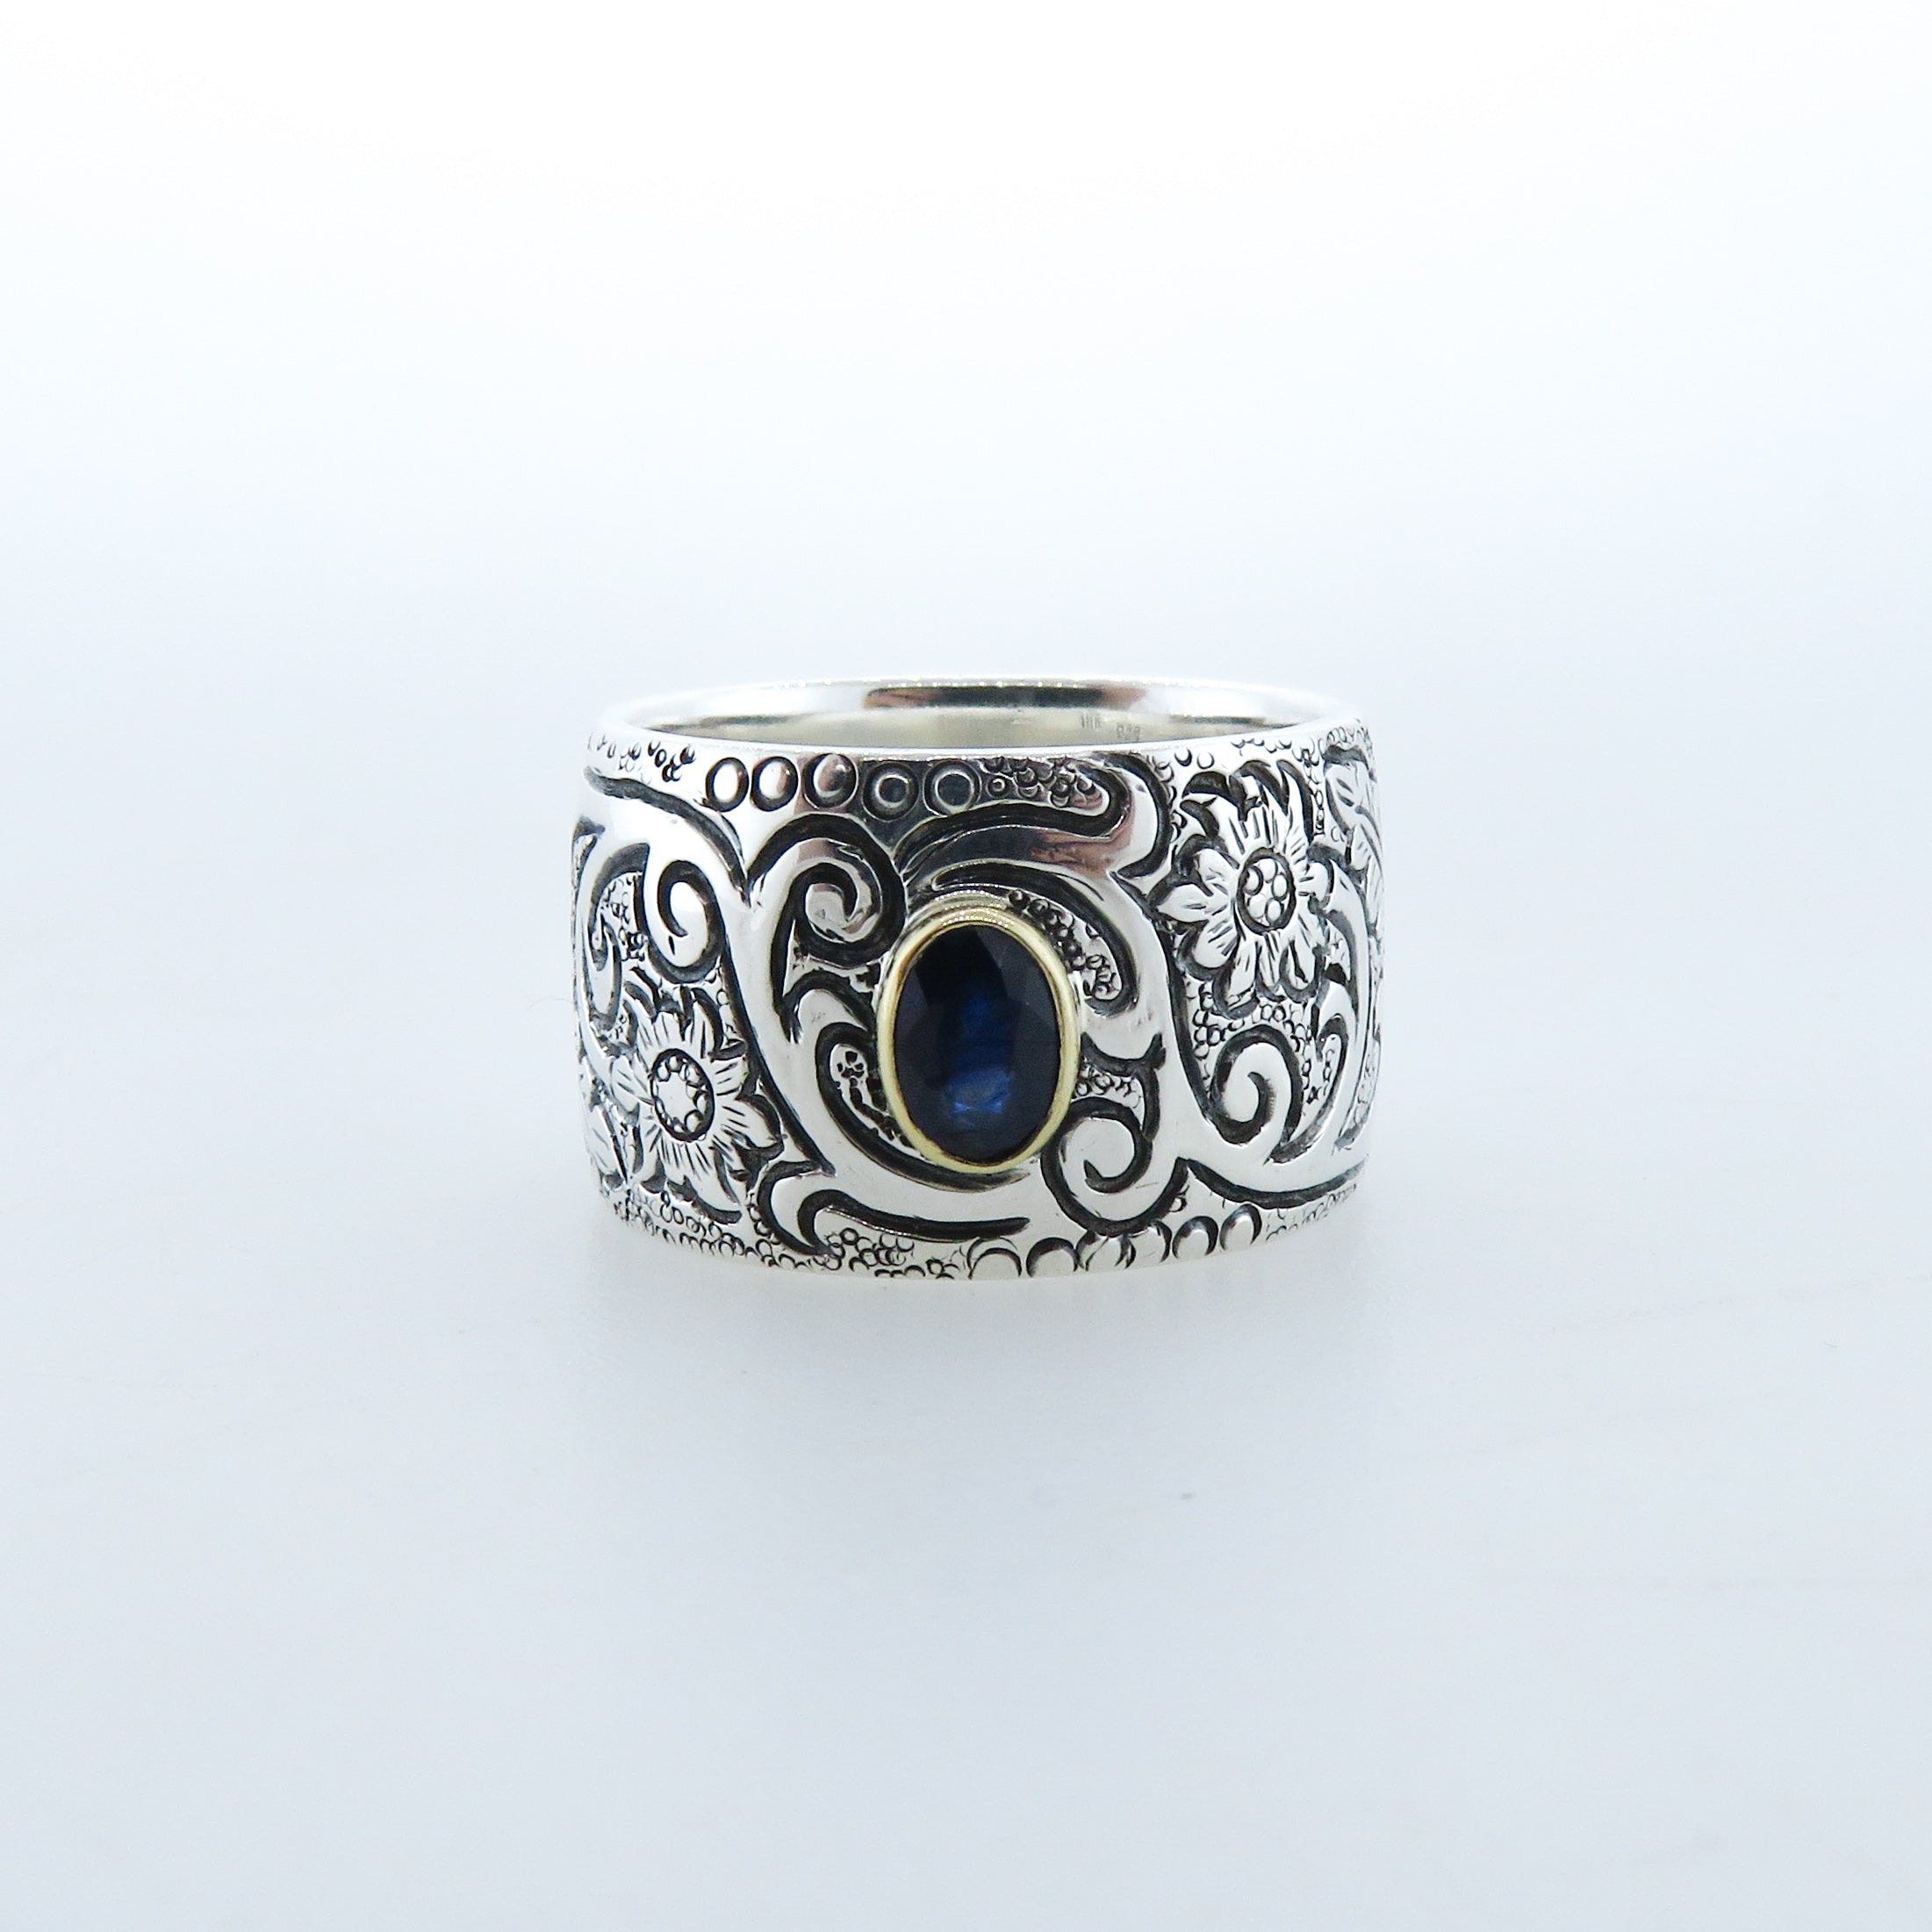 Blue Sapphire Sterling Silver Ring with 18k Gold